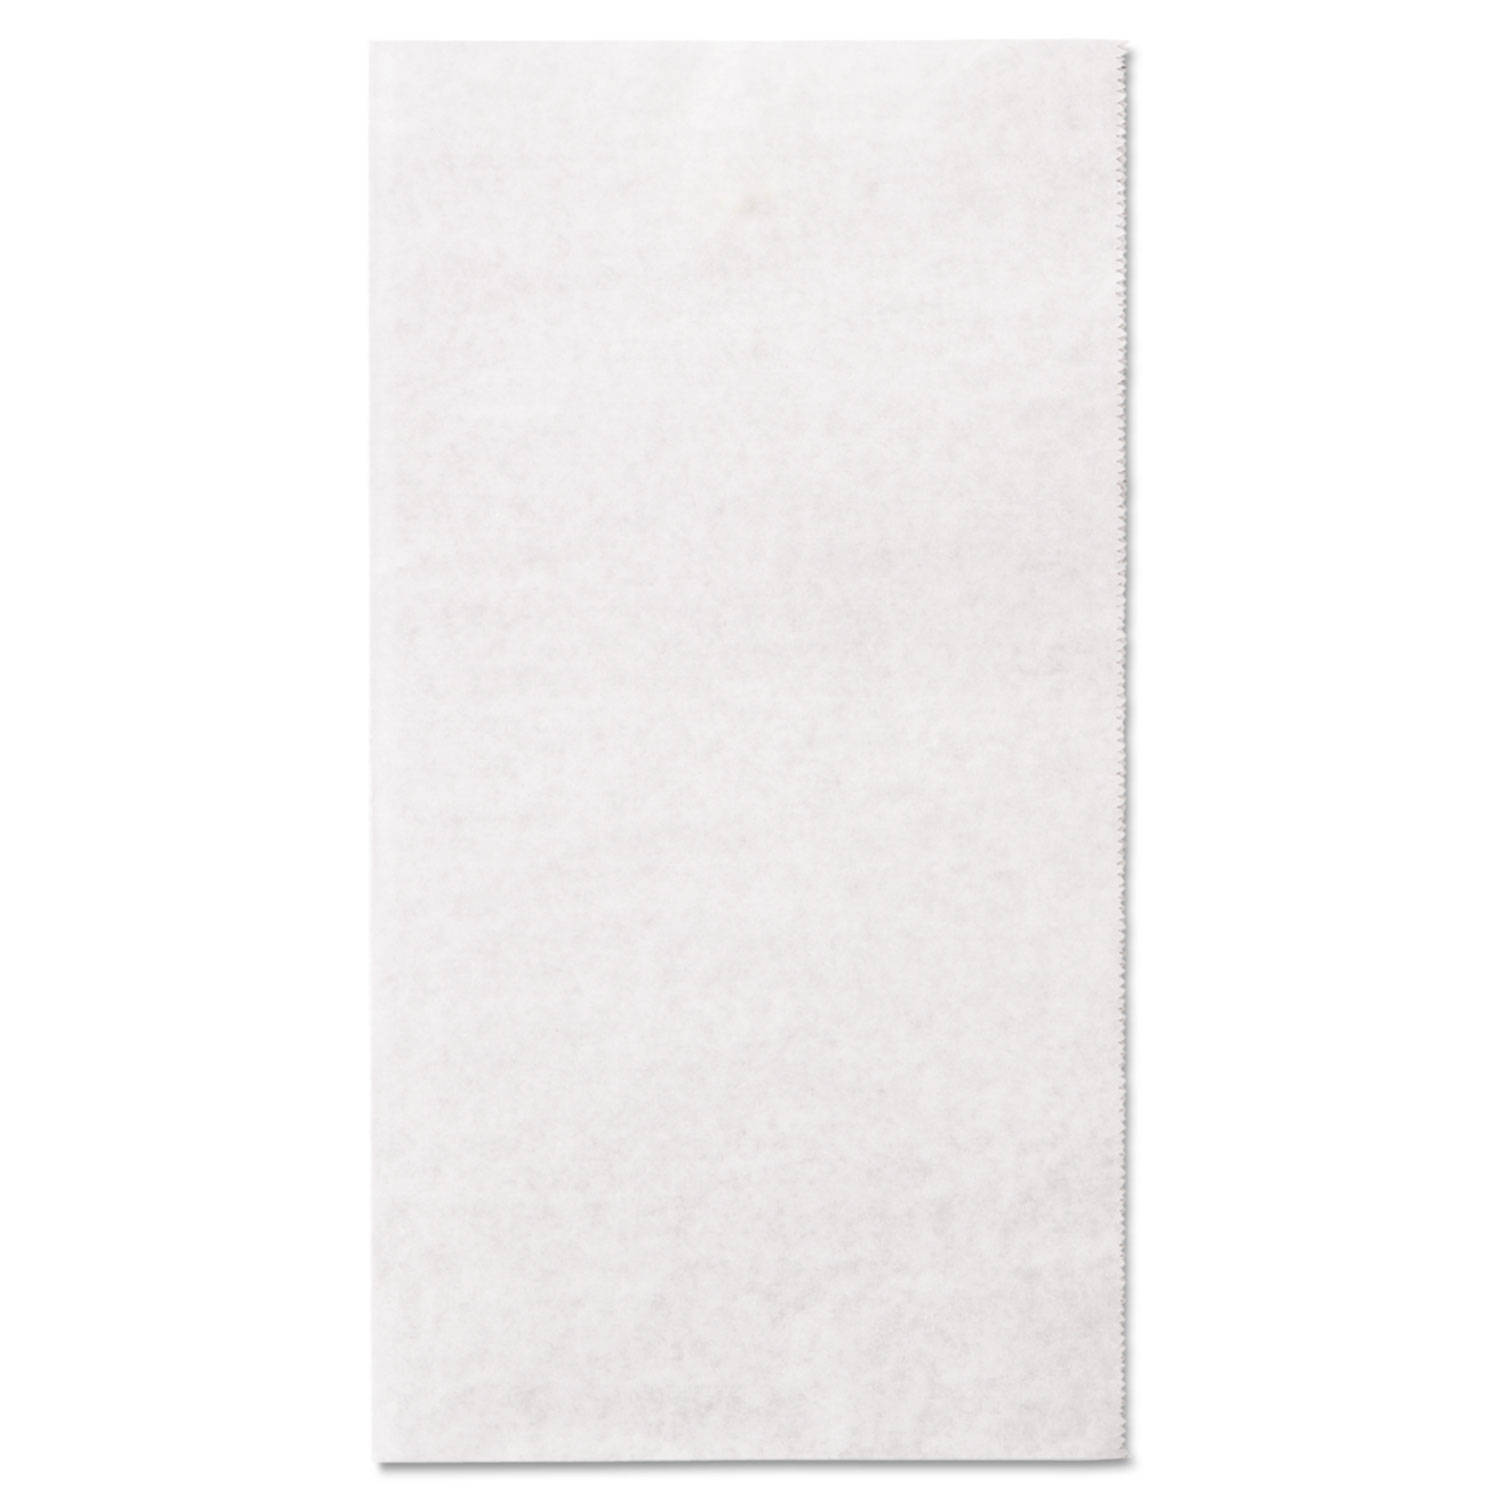  Marcal MCD 5292 Eco-Pac Interfolded Dry Wax Paper, 10 x 10 3/4, White, 500/Pack, 12 Packs/Carton (MCD5292) 